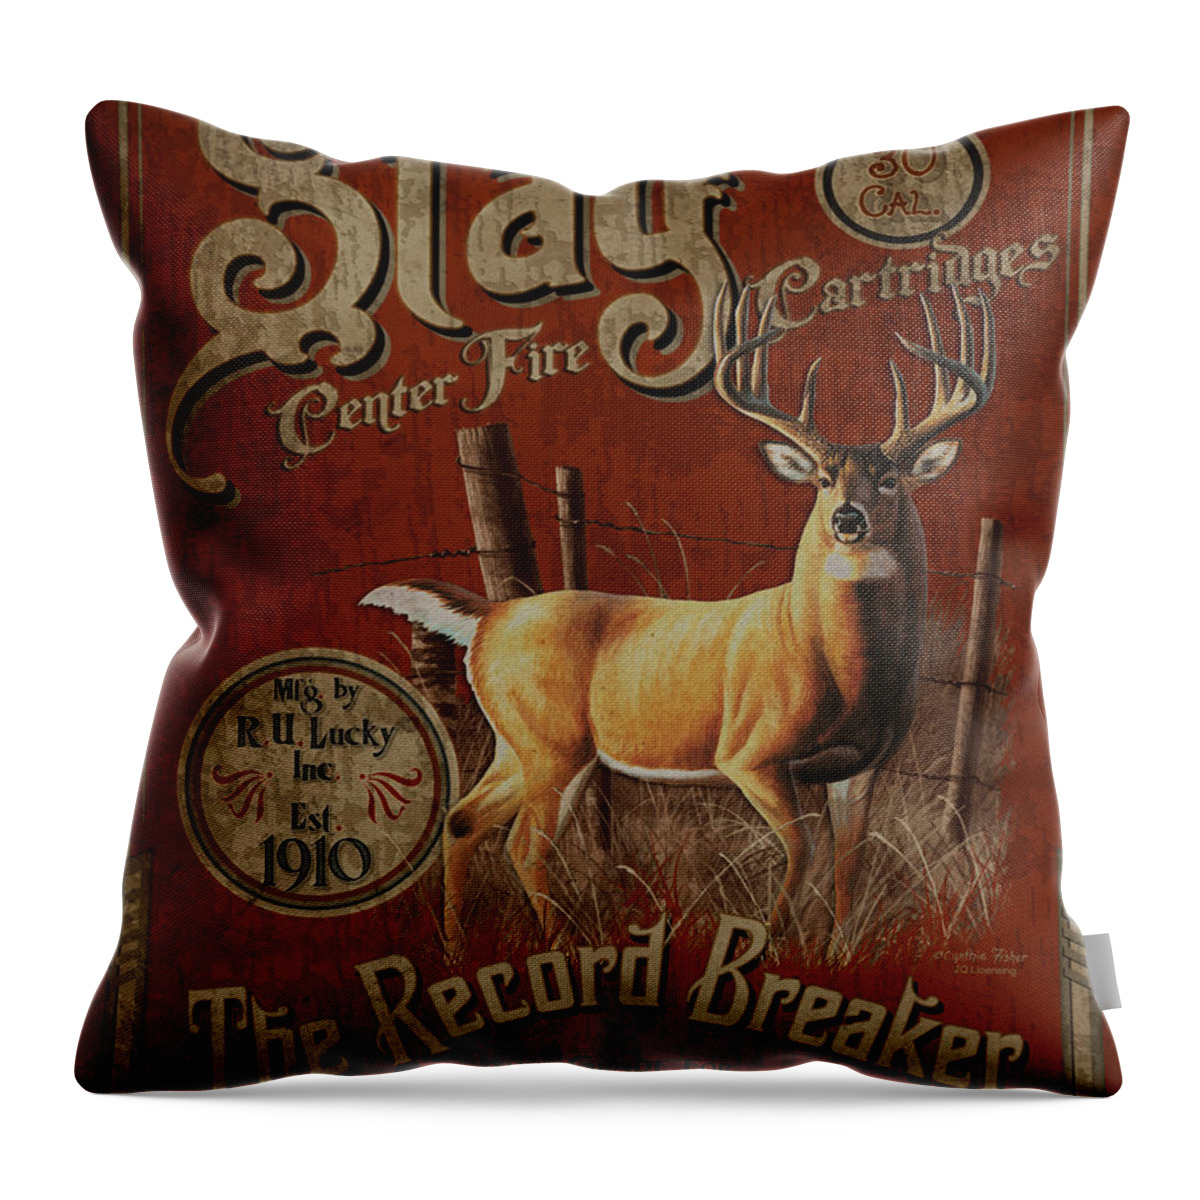 Cynthie Fisher Throw Pillow featuring the painting Stag Cartridges Sign by JQ Licensing